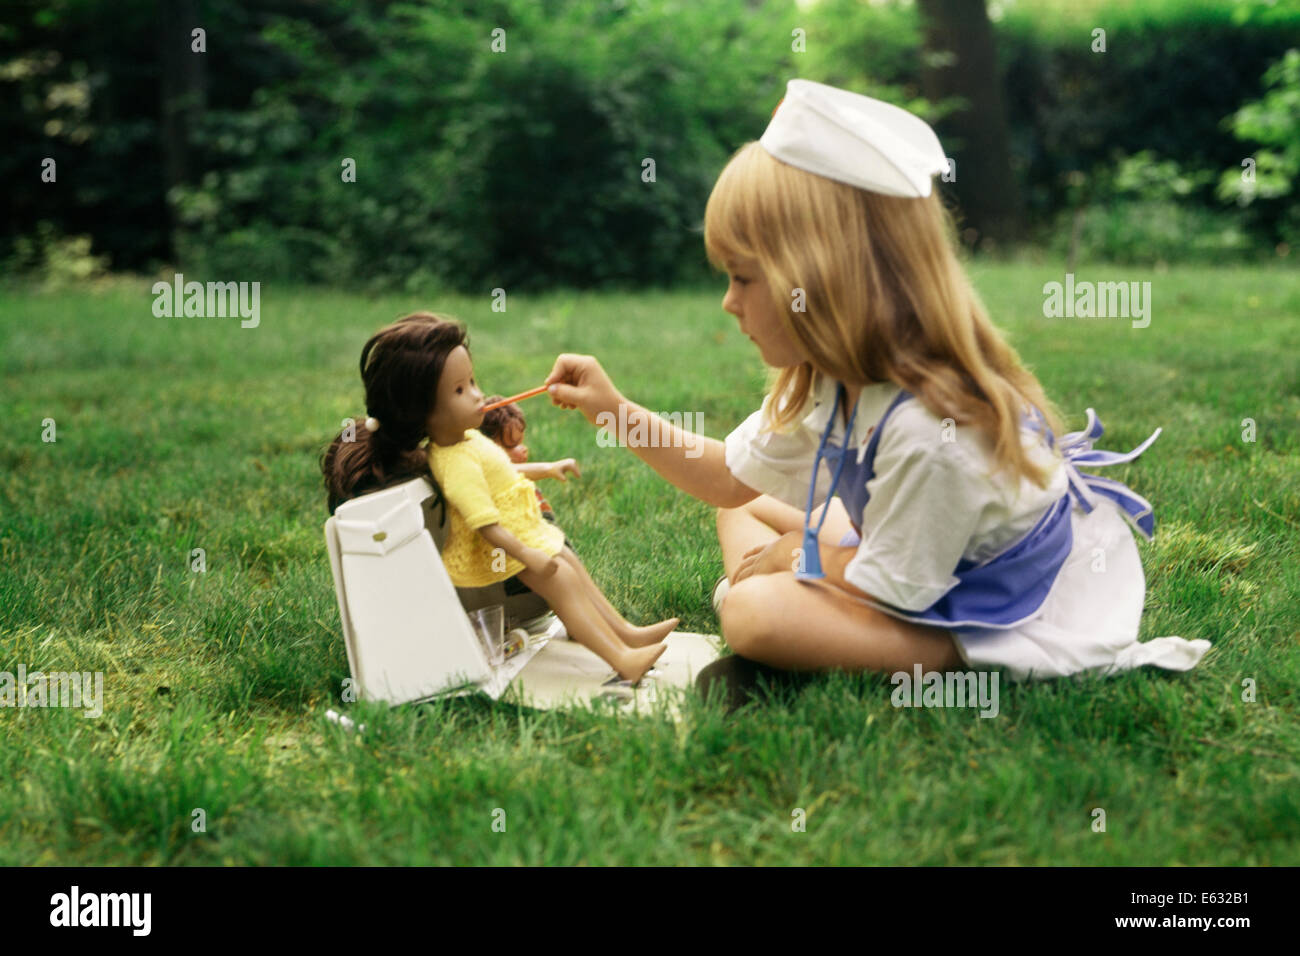 1970s LITTLE GIRL IN NURSE OUTFIT TAKING TEMPERATURE OF DOLL PLAYING ROLE PRACTICE LAWN YARD Stock Photo